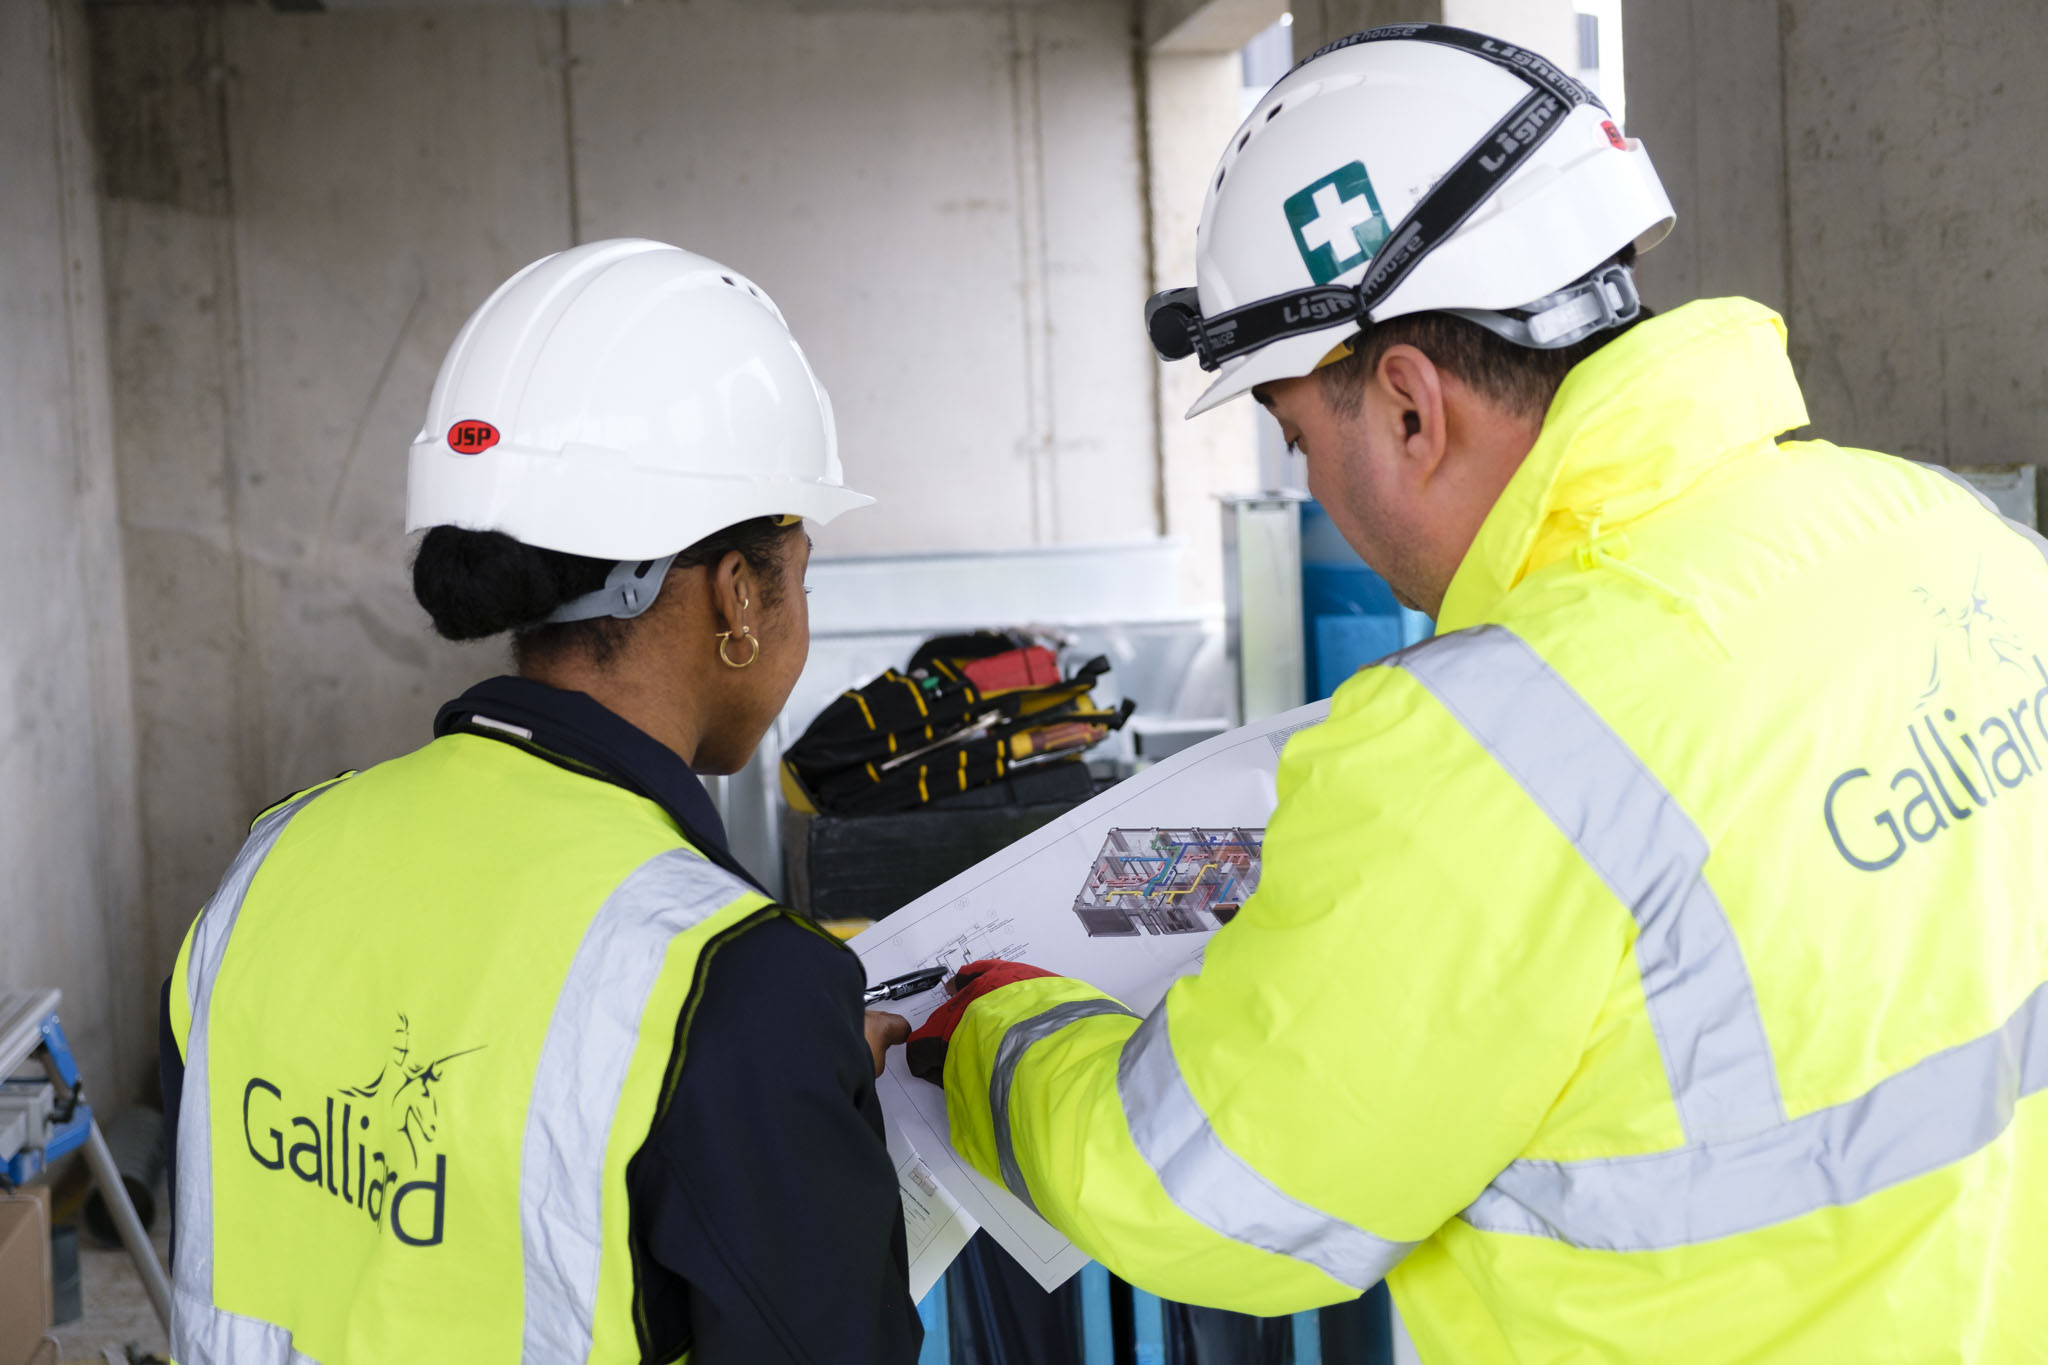 Site manager, Galliard Homes